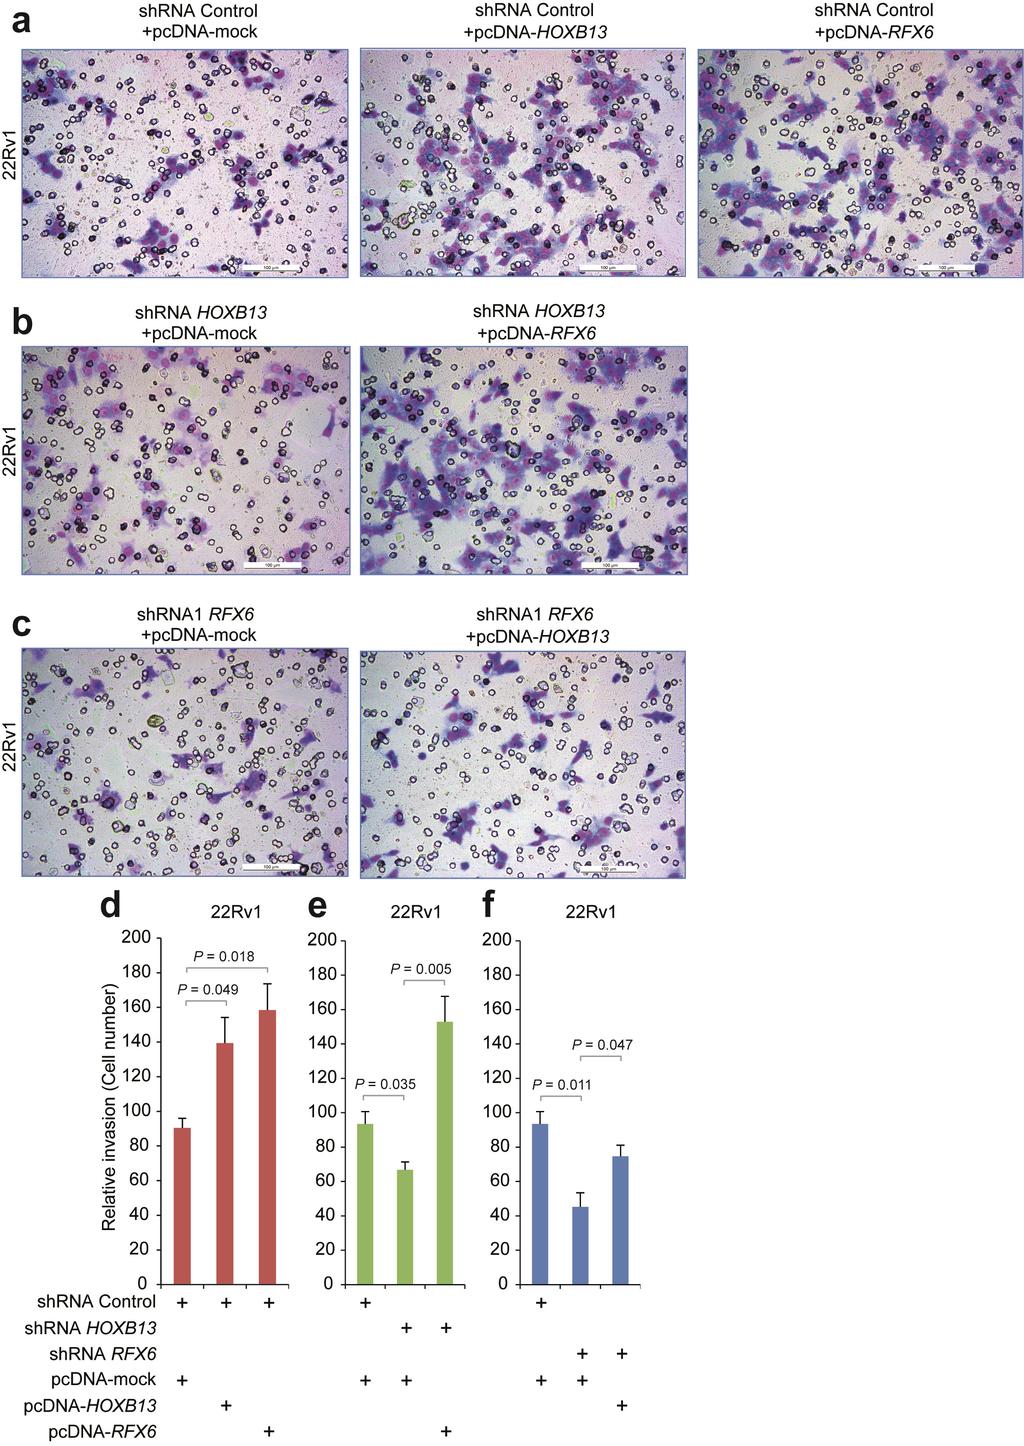 Supplementary Figure 11: RFX6 and HOXB13 play a role in prostate cancer cell proliferation and invasion.